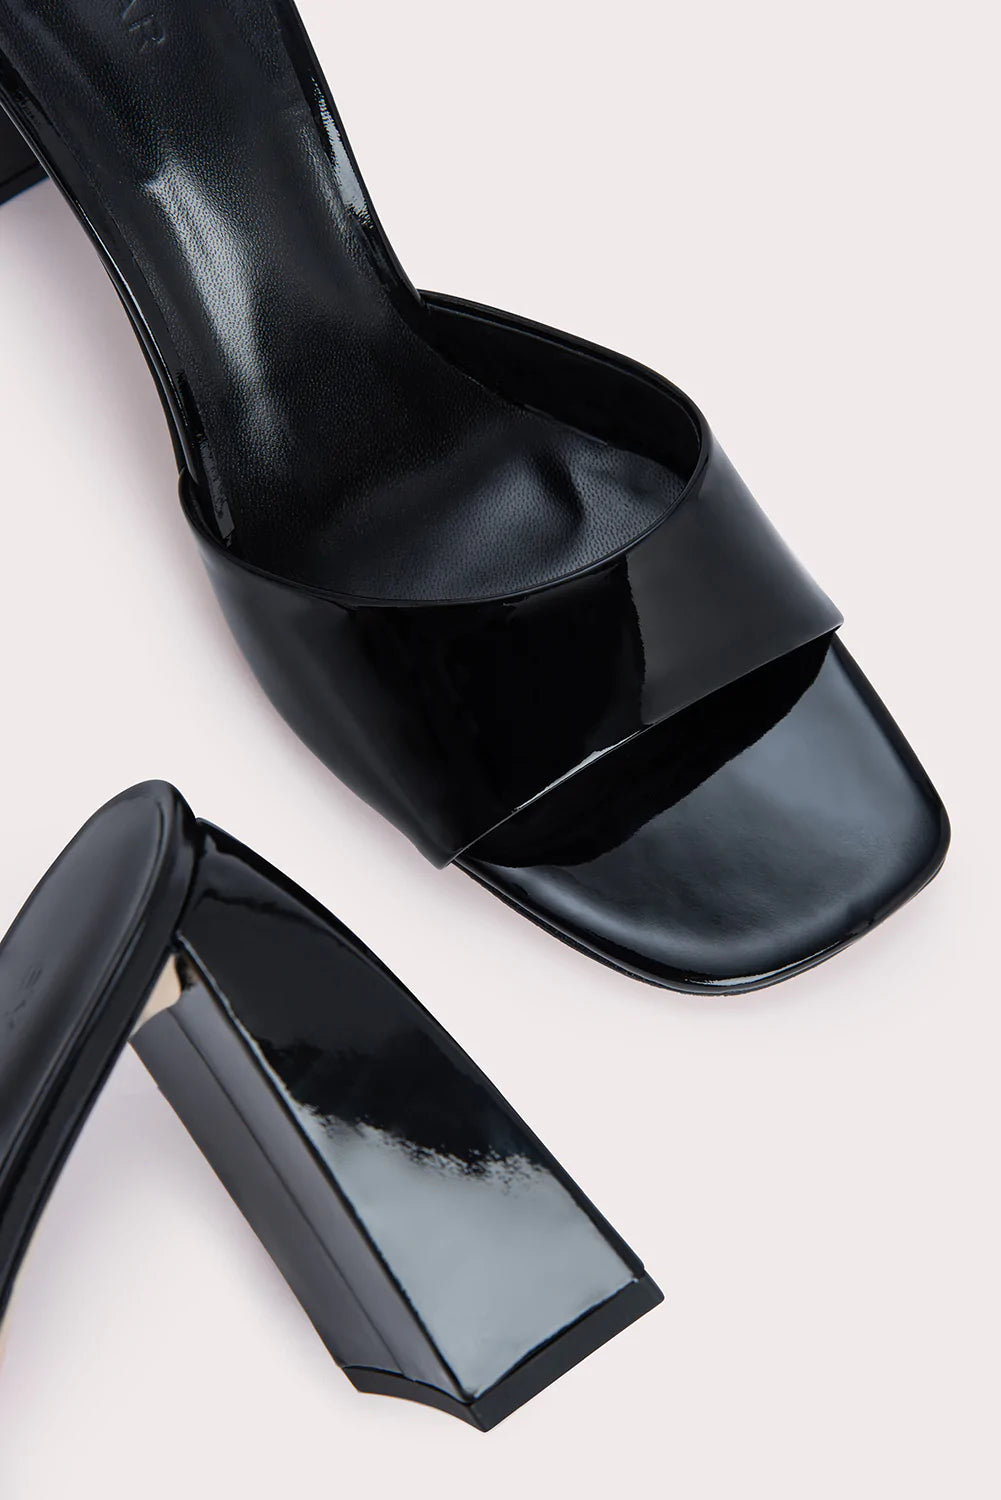 BY FAR Michelle Heel in Black from The New Trend